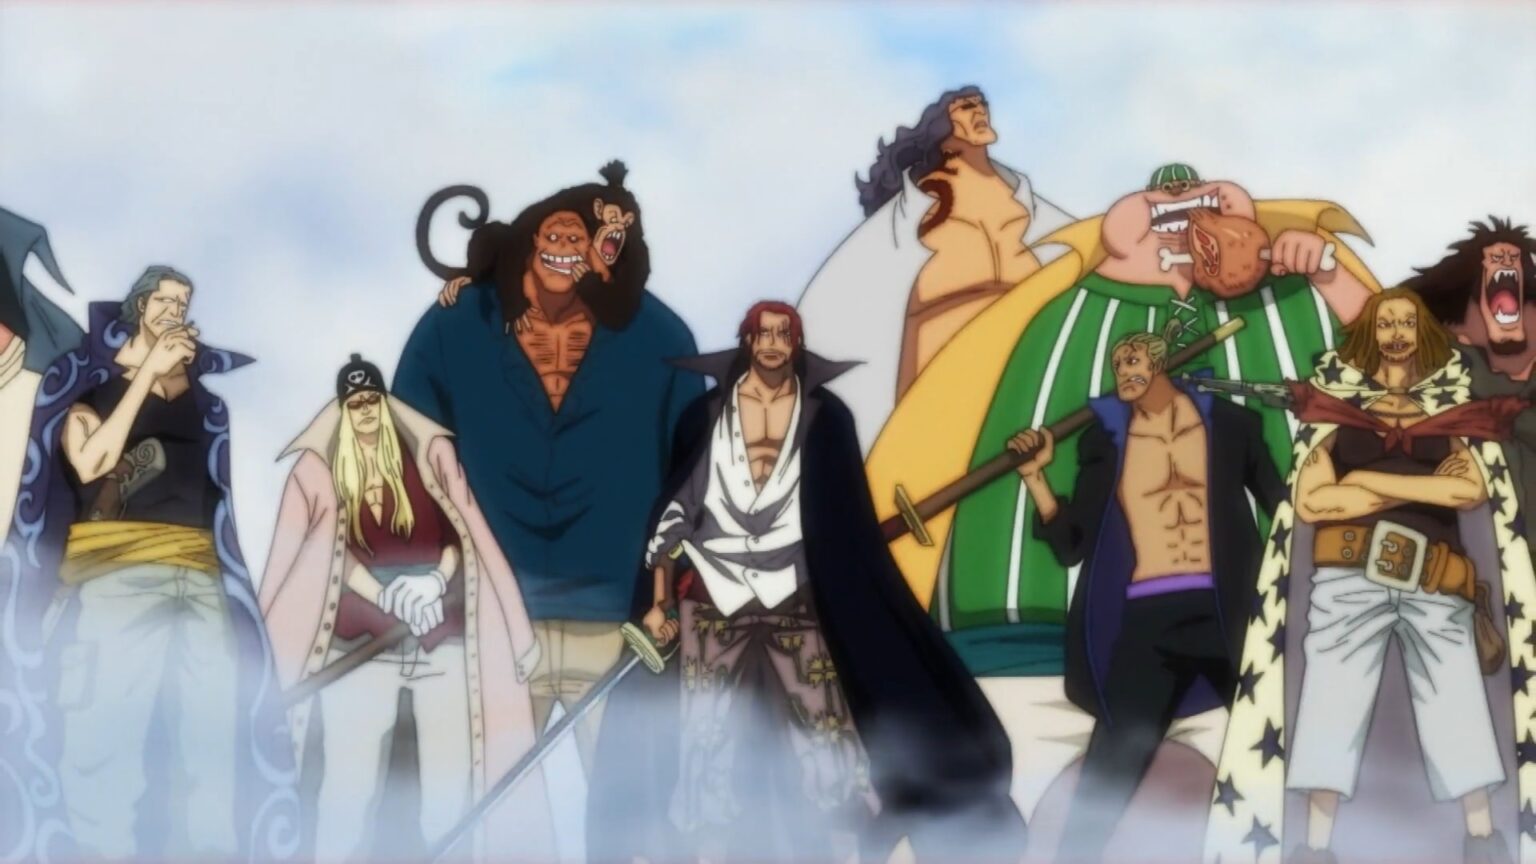 One Piece 957 The redhair Pirates Are one of the strongest Yonko Crews.